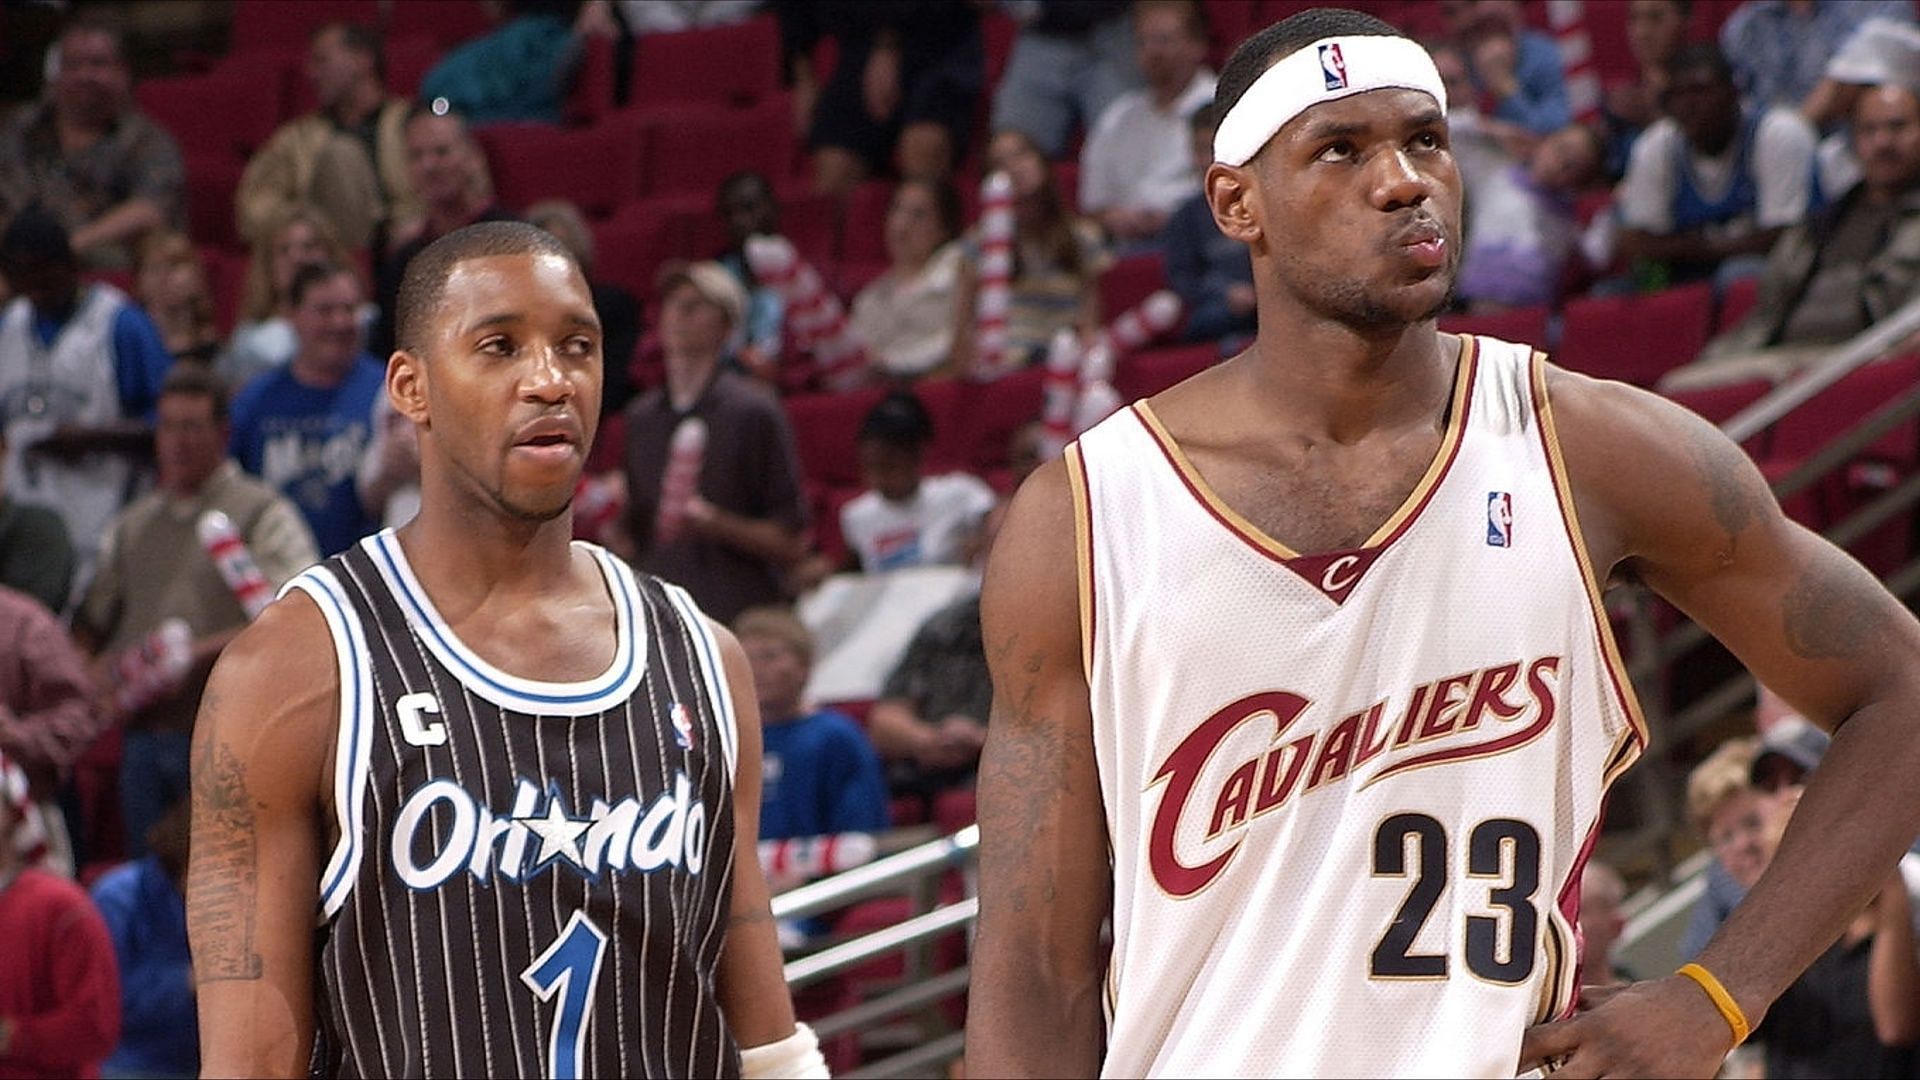 Tracy McGrady of the Orlando Magic against LeBron James (right) of the Cleveland Cavaliers in 2003